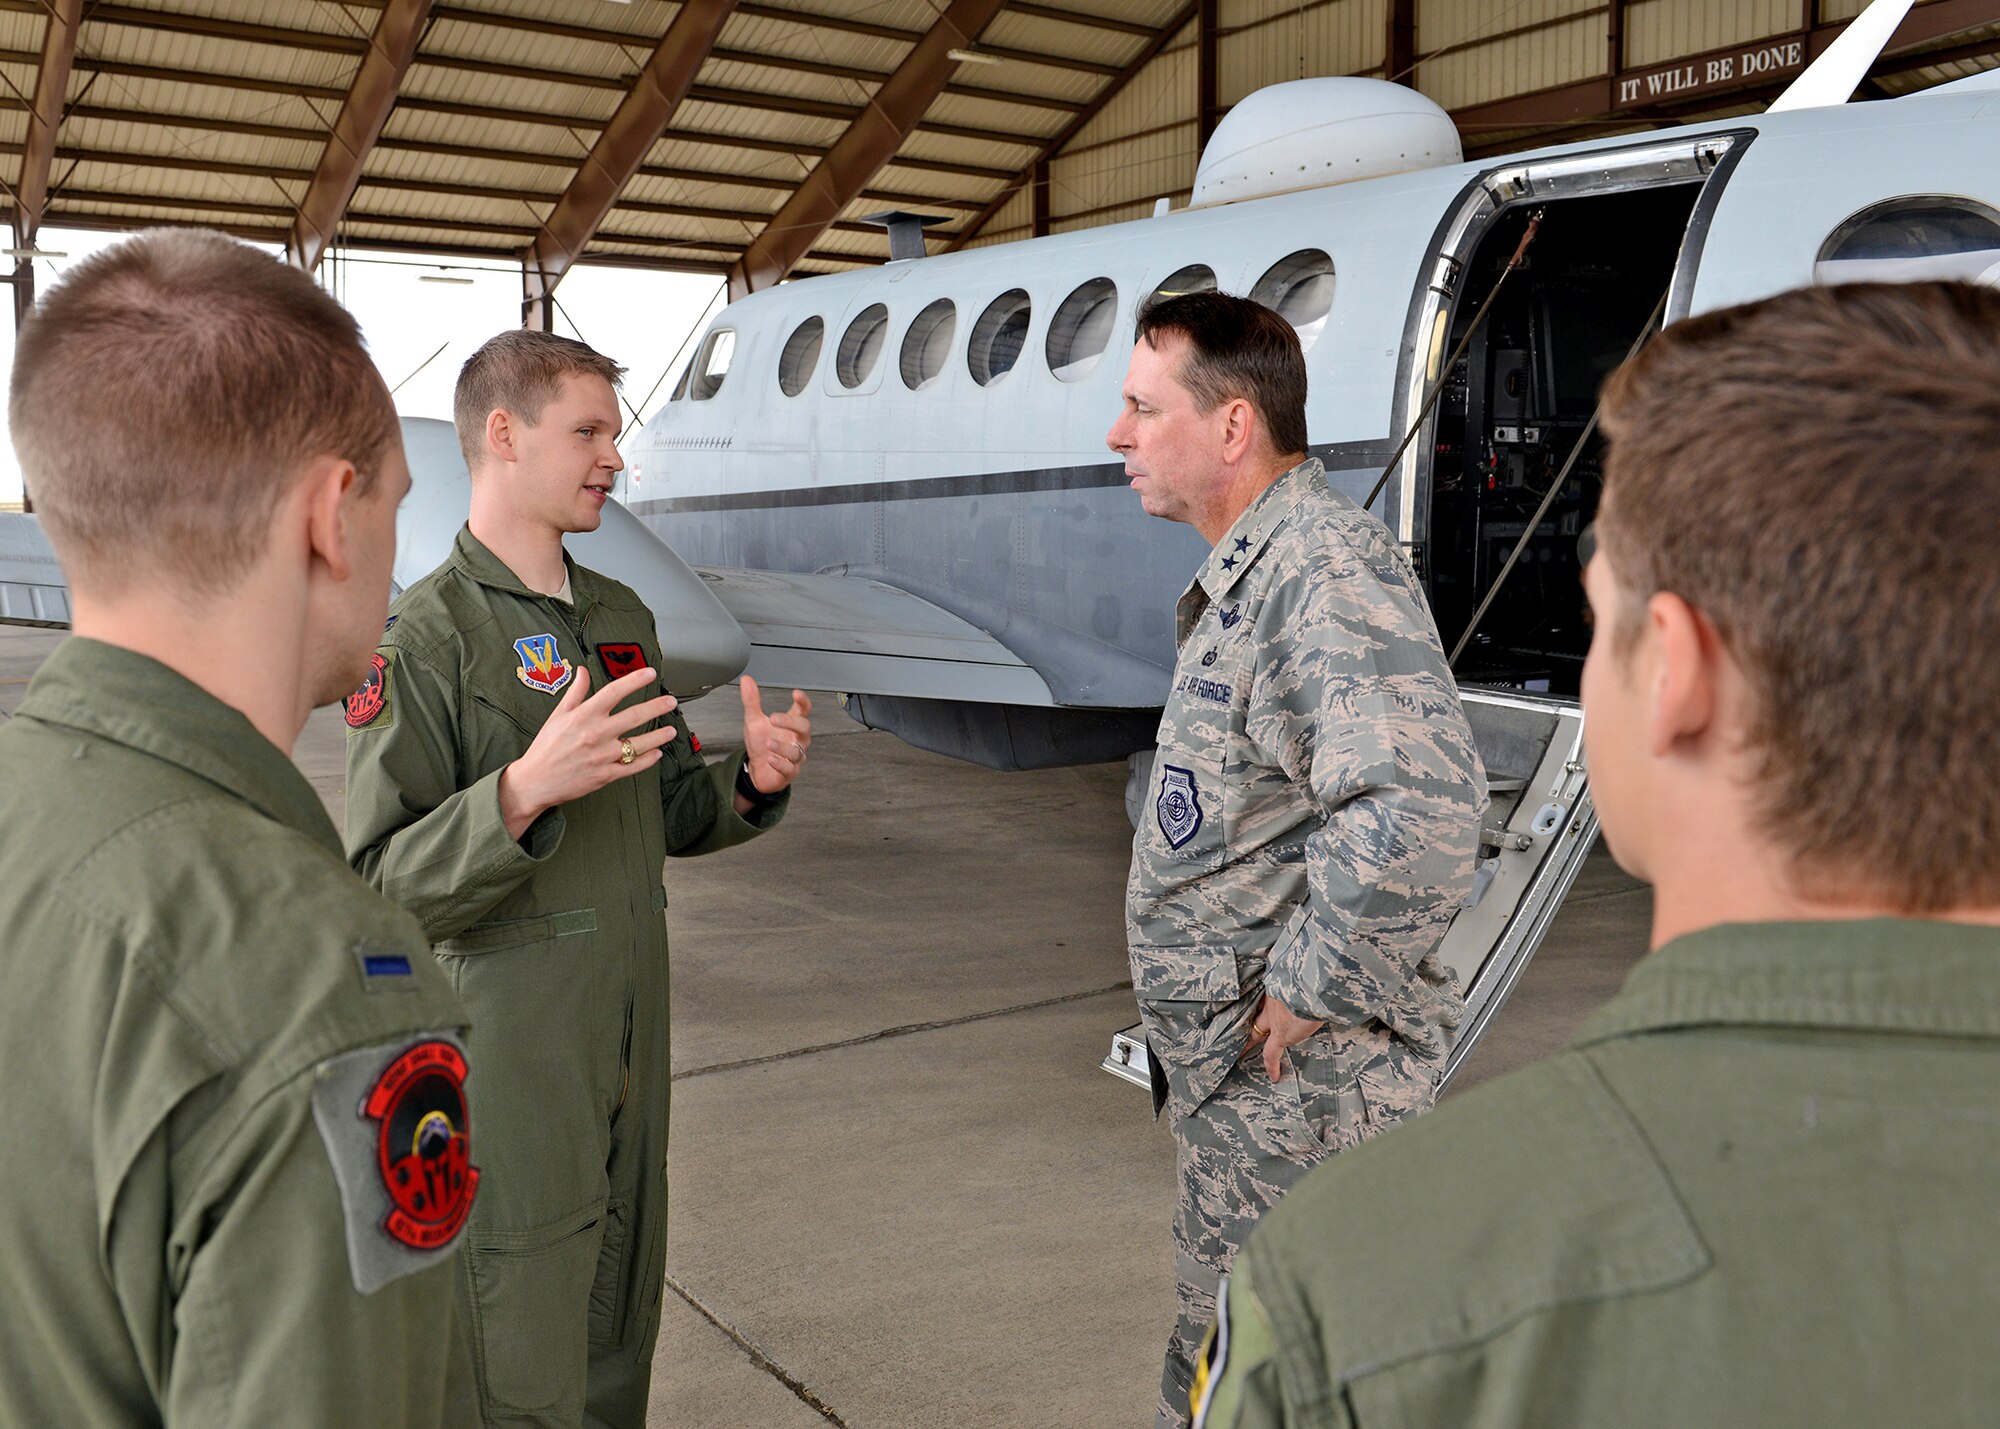 MC-12 Liberty aircrew members speak with Maj. Gen. John Shanahan, 25th Air Force commander, during his visit to the 9th Reconnaissance Wing at Beale Air Force Base, Calif., Oct. 15, 2014. Shanahan and Chief Master Sgt. Roger Towberman, 25th AF command chief, visited Beale for the first time since the Sept. 29 re-alignment of the 9th RW to the 25th AF.  (U.S Air Force photo by John Schwab/Released)